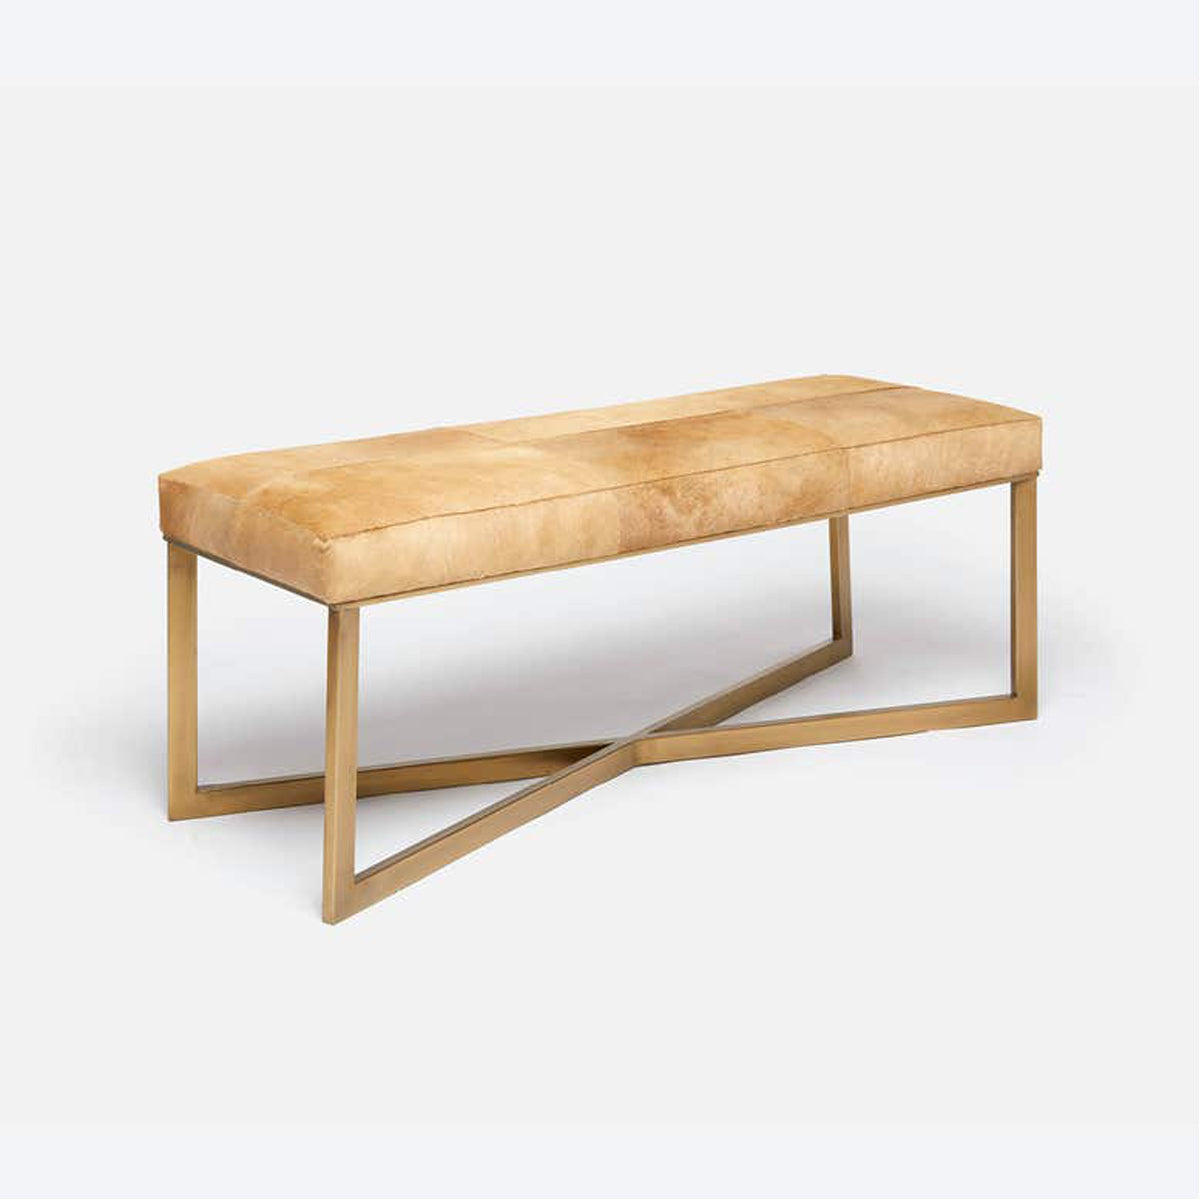 Made Goods Roger Cowhide Double Bench in Humboldt Cotton Jute